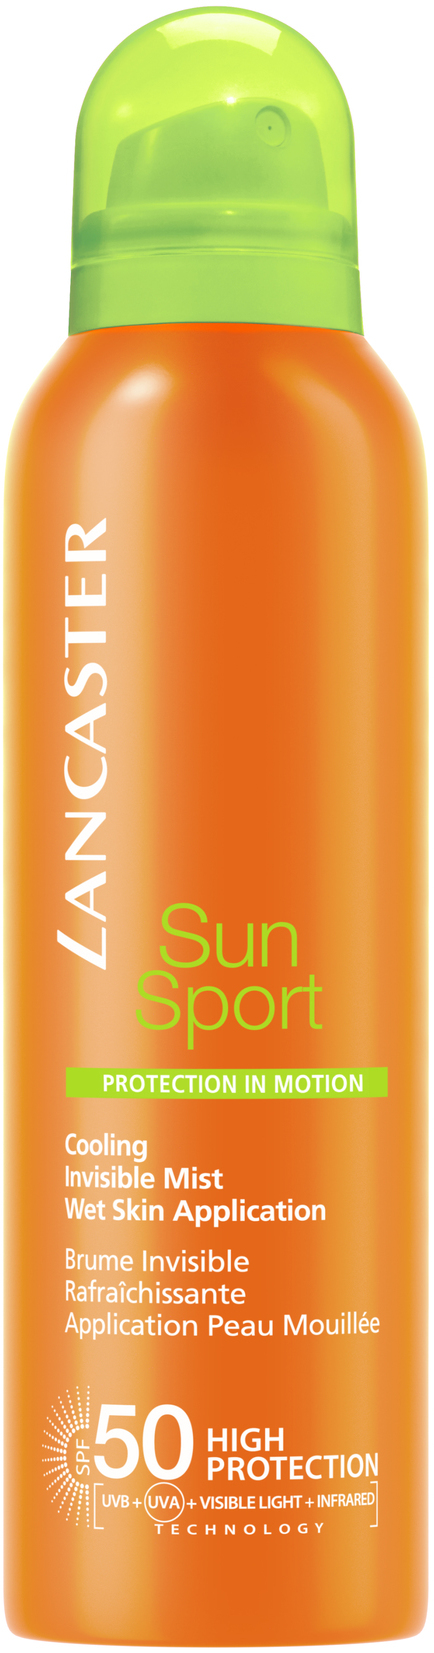 opslag Margaret Mitchell informatie Lancaster Sun Sport Invisible Mist SPF50 200ml in duty-free at airport  Boryspil